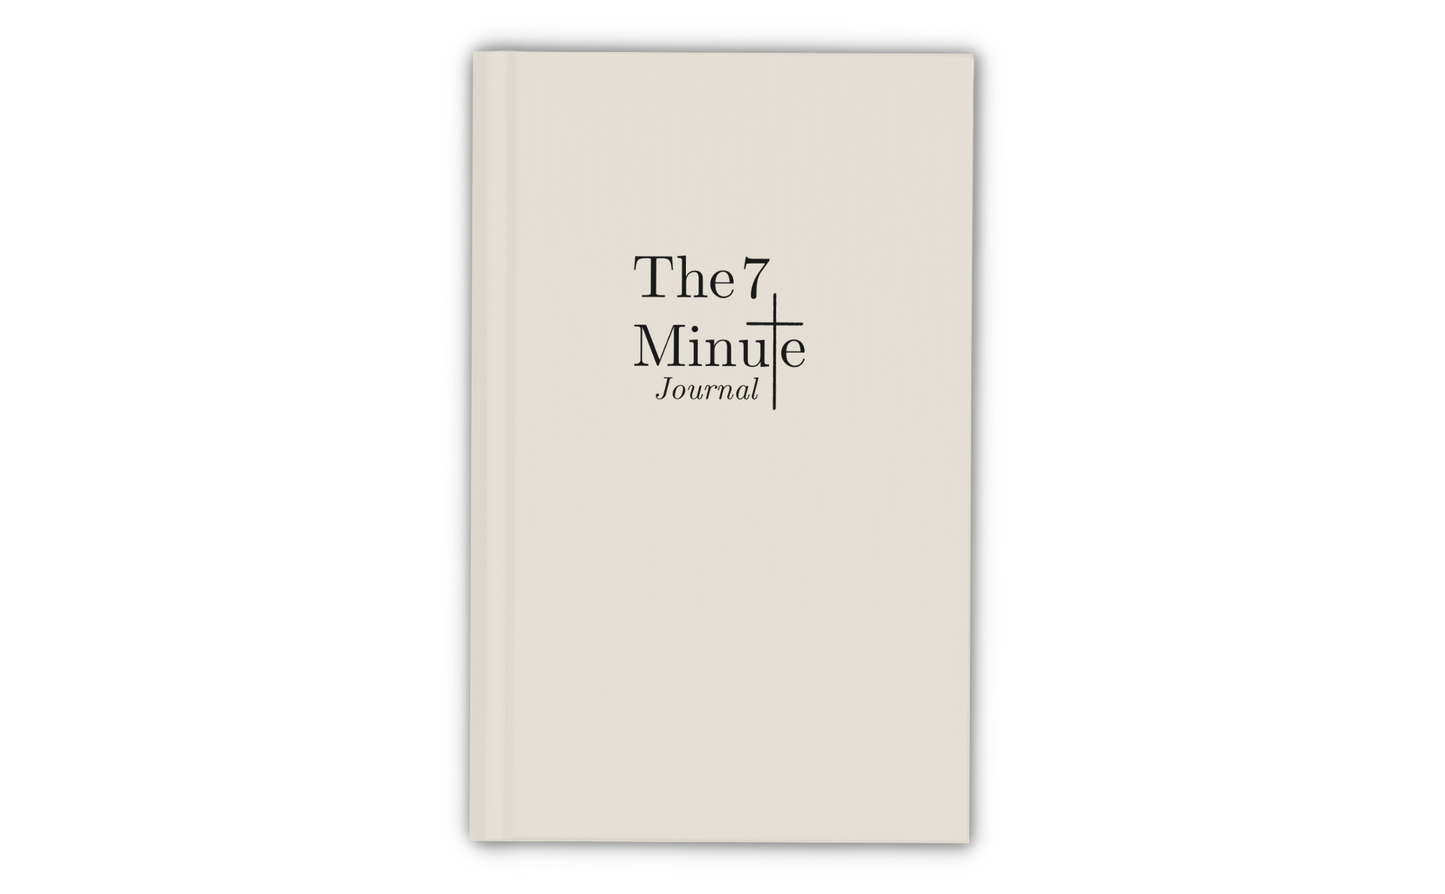 The 7 Minute Journal for Christians (Hardcover) IF SOLD OUT — CLICK LINK BELOW TO BUY IT ON AMAZON↓